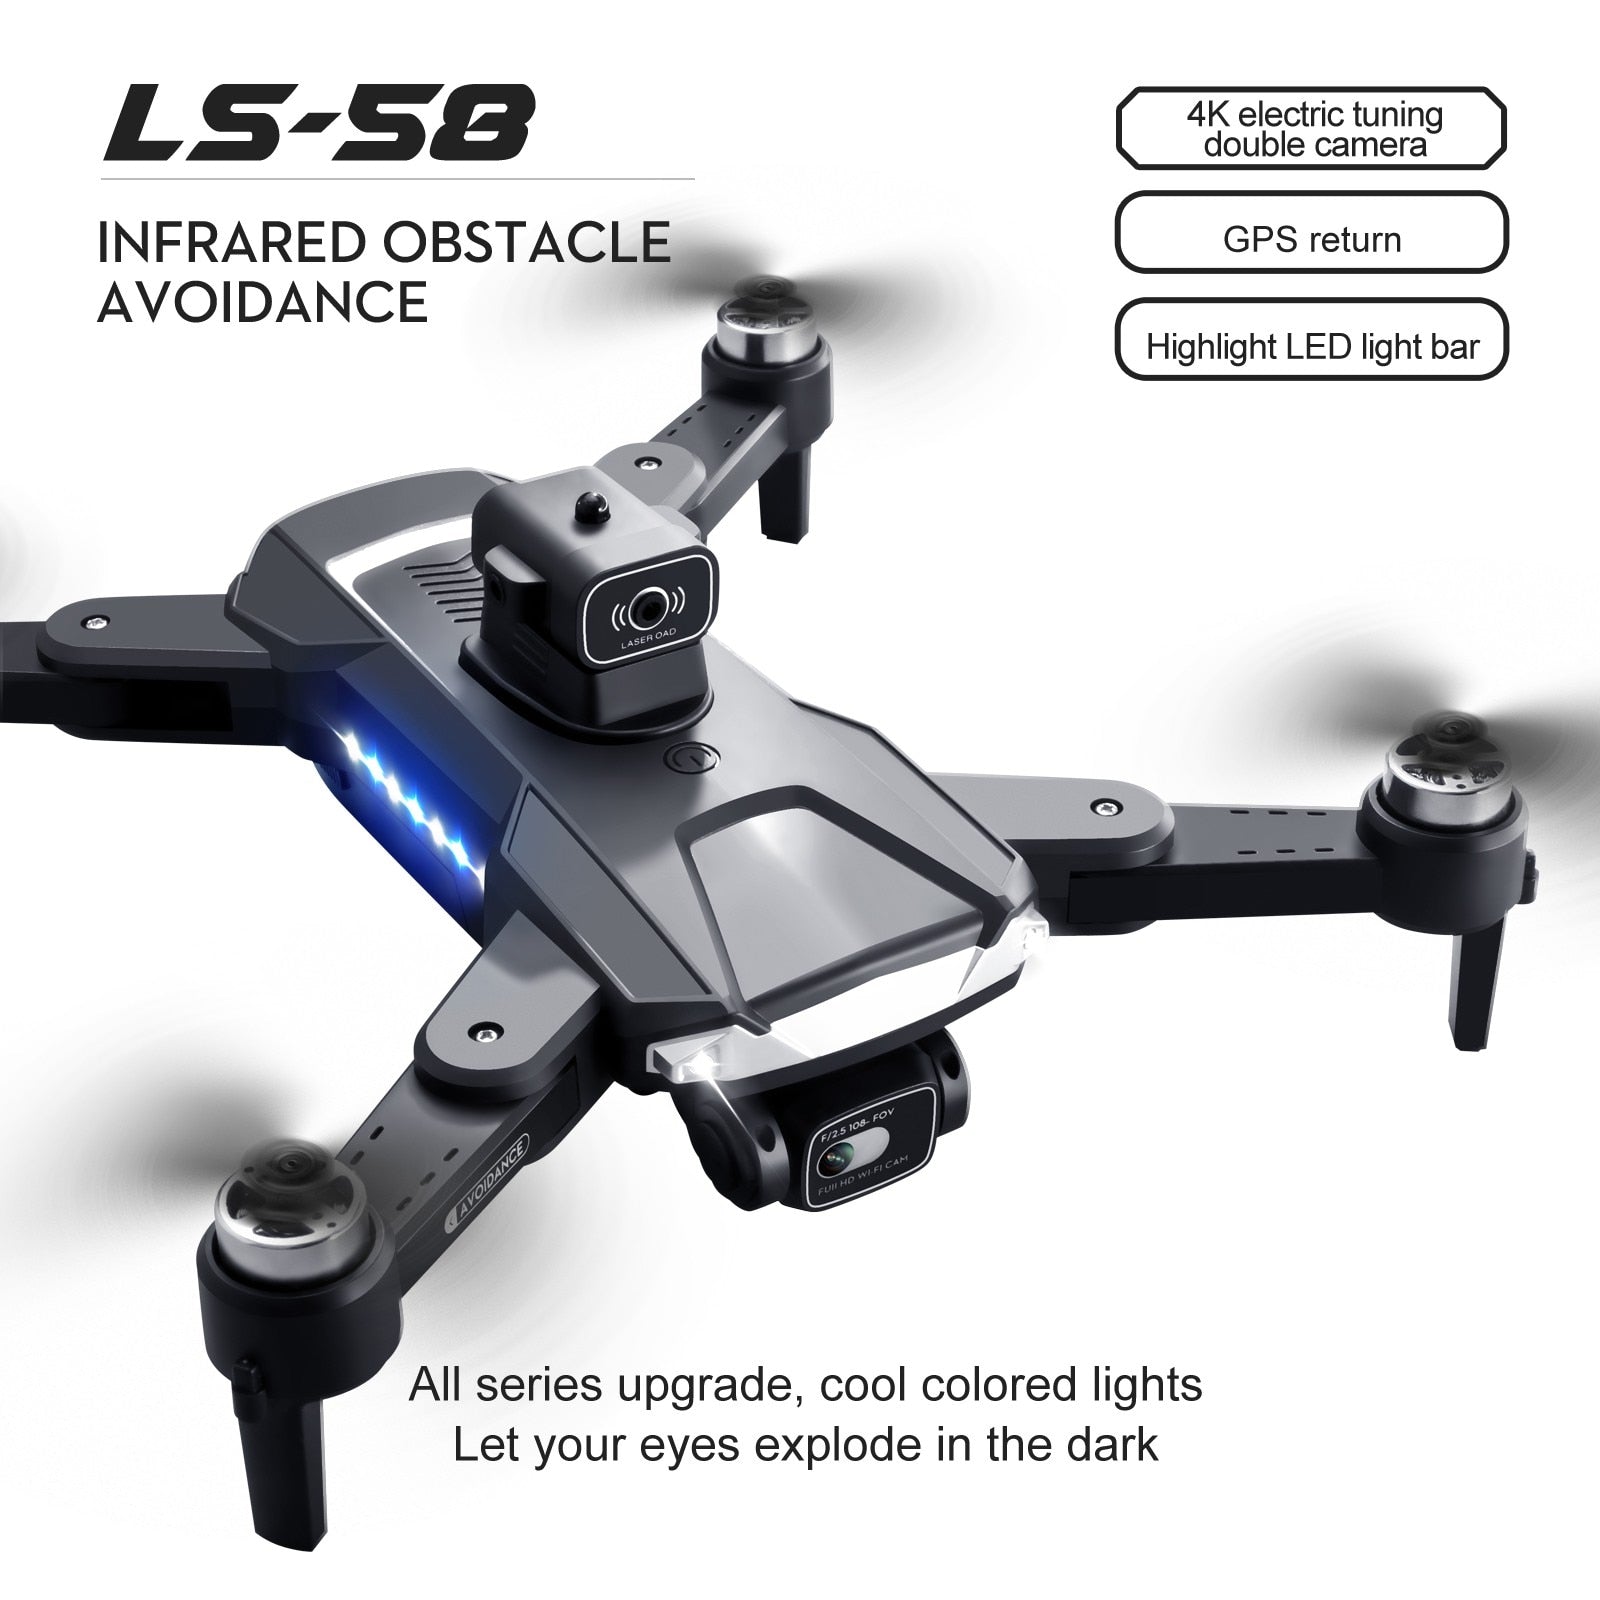 LS58 Drone, Ls-5q 4K electric tuning double camera INFRARED